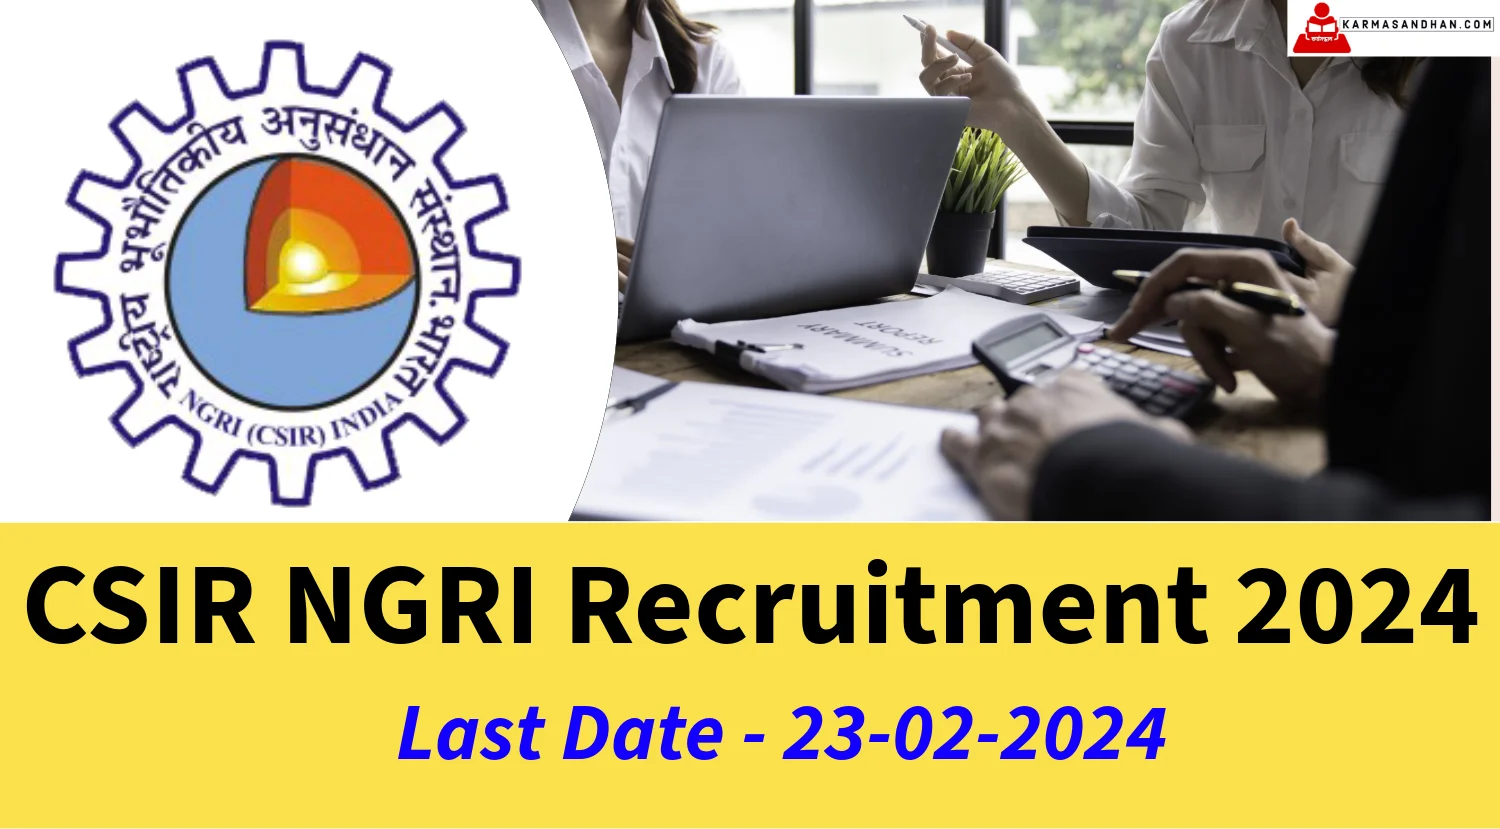 CSIR NGRI Recruitment 2024, Check Consultant Eligibility and Walk-In Details Now